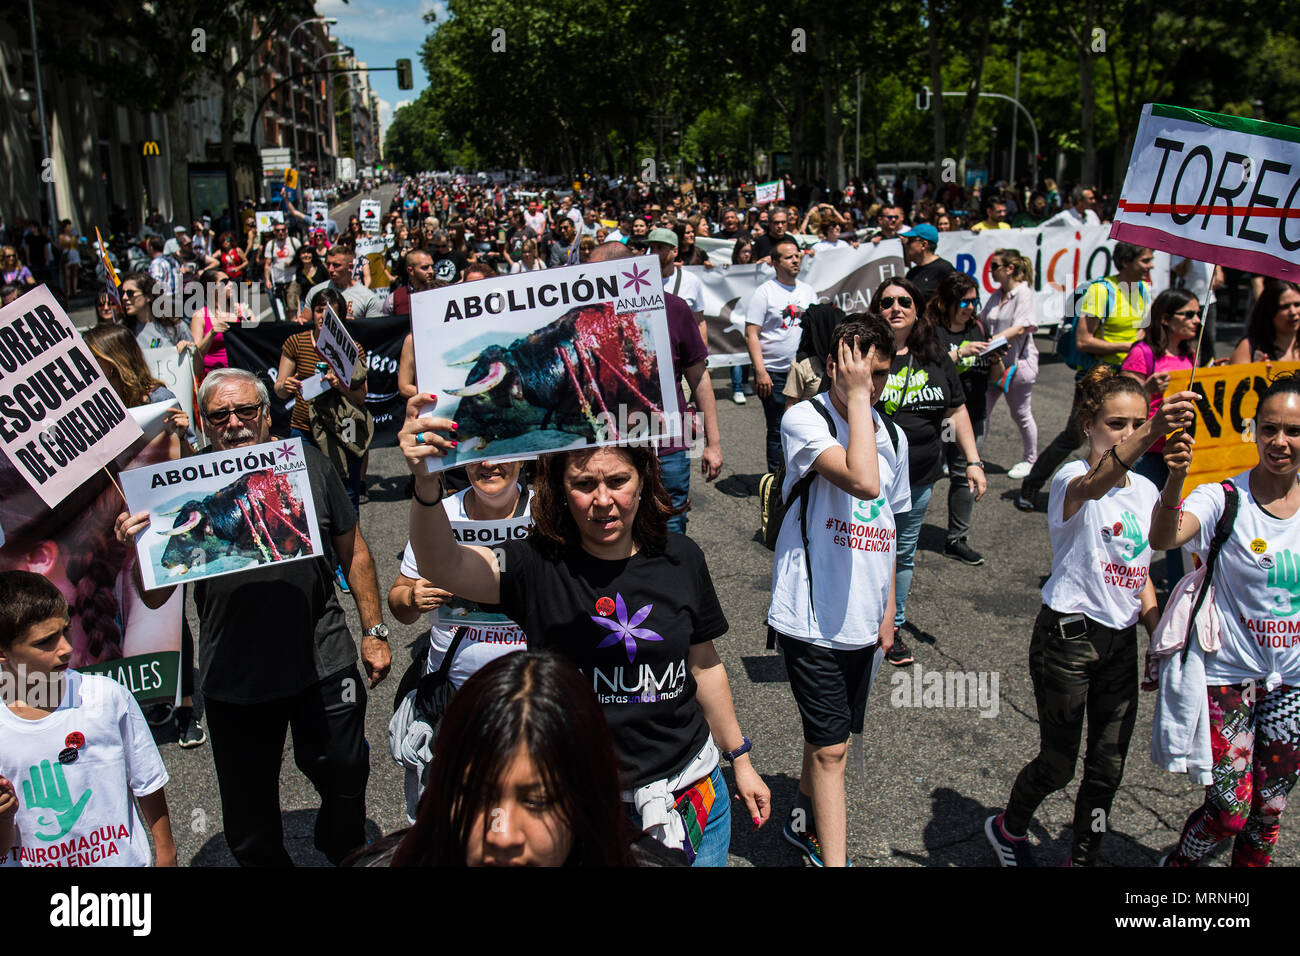 Madrid, Spain. 27th May, 2018. Anti-bullfighting protesters during a demonstration under the slogan 'Bullfighting is Violence' demanding to abolish bullfighting and animal suffering, in Madrid, Spain. Credit: Marcos del Mazo/Alamy Live News Stock Photo